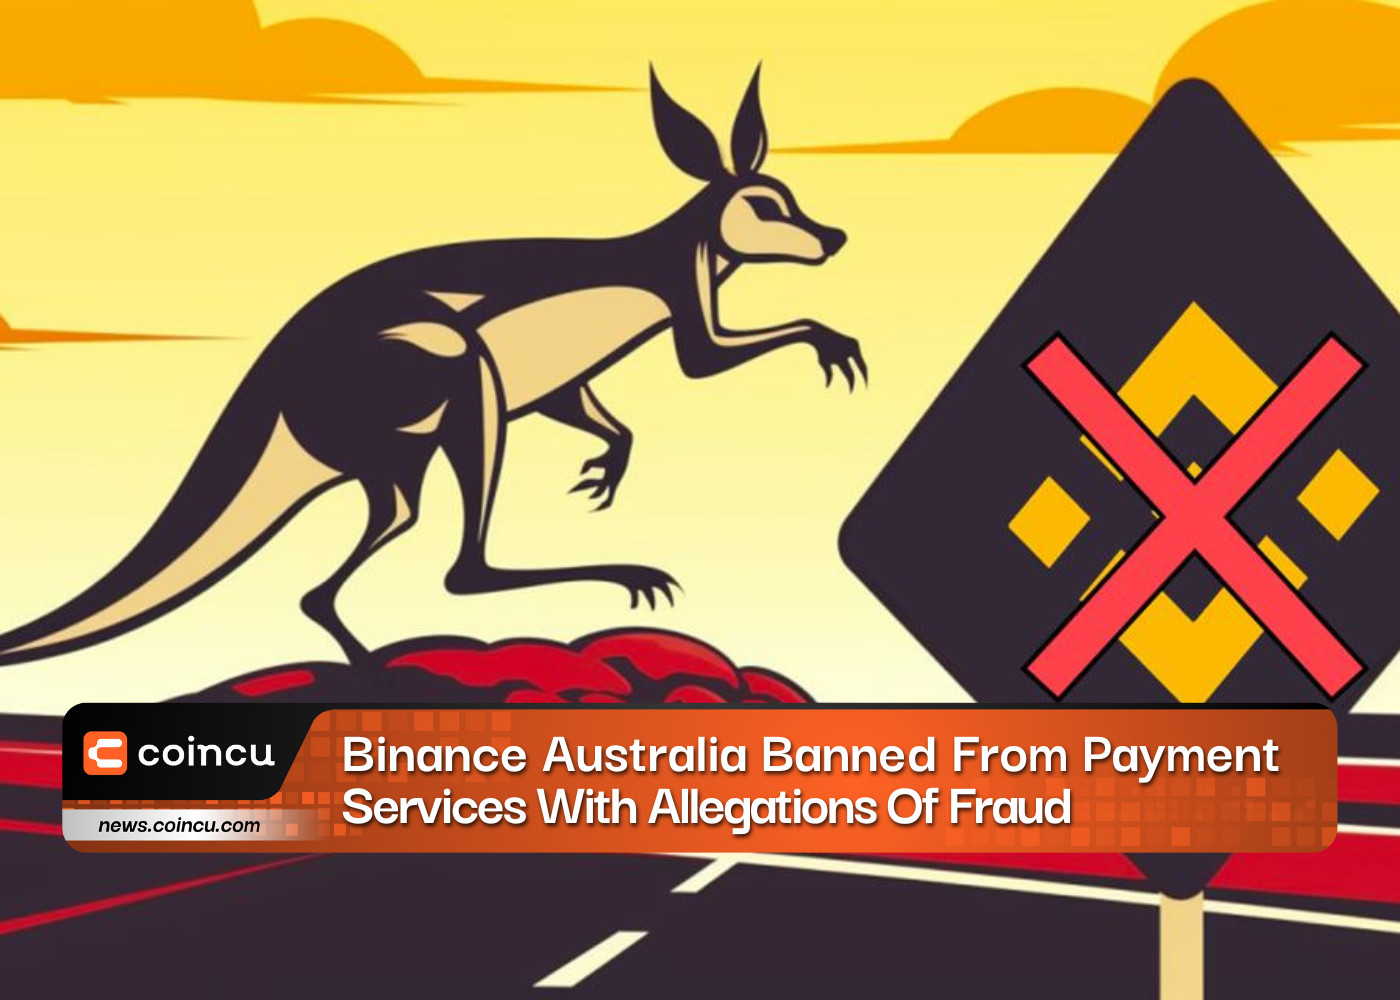 Binance Australia Banned From Payment Services With Allegations Of Fraud